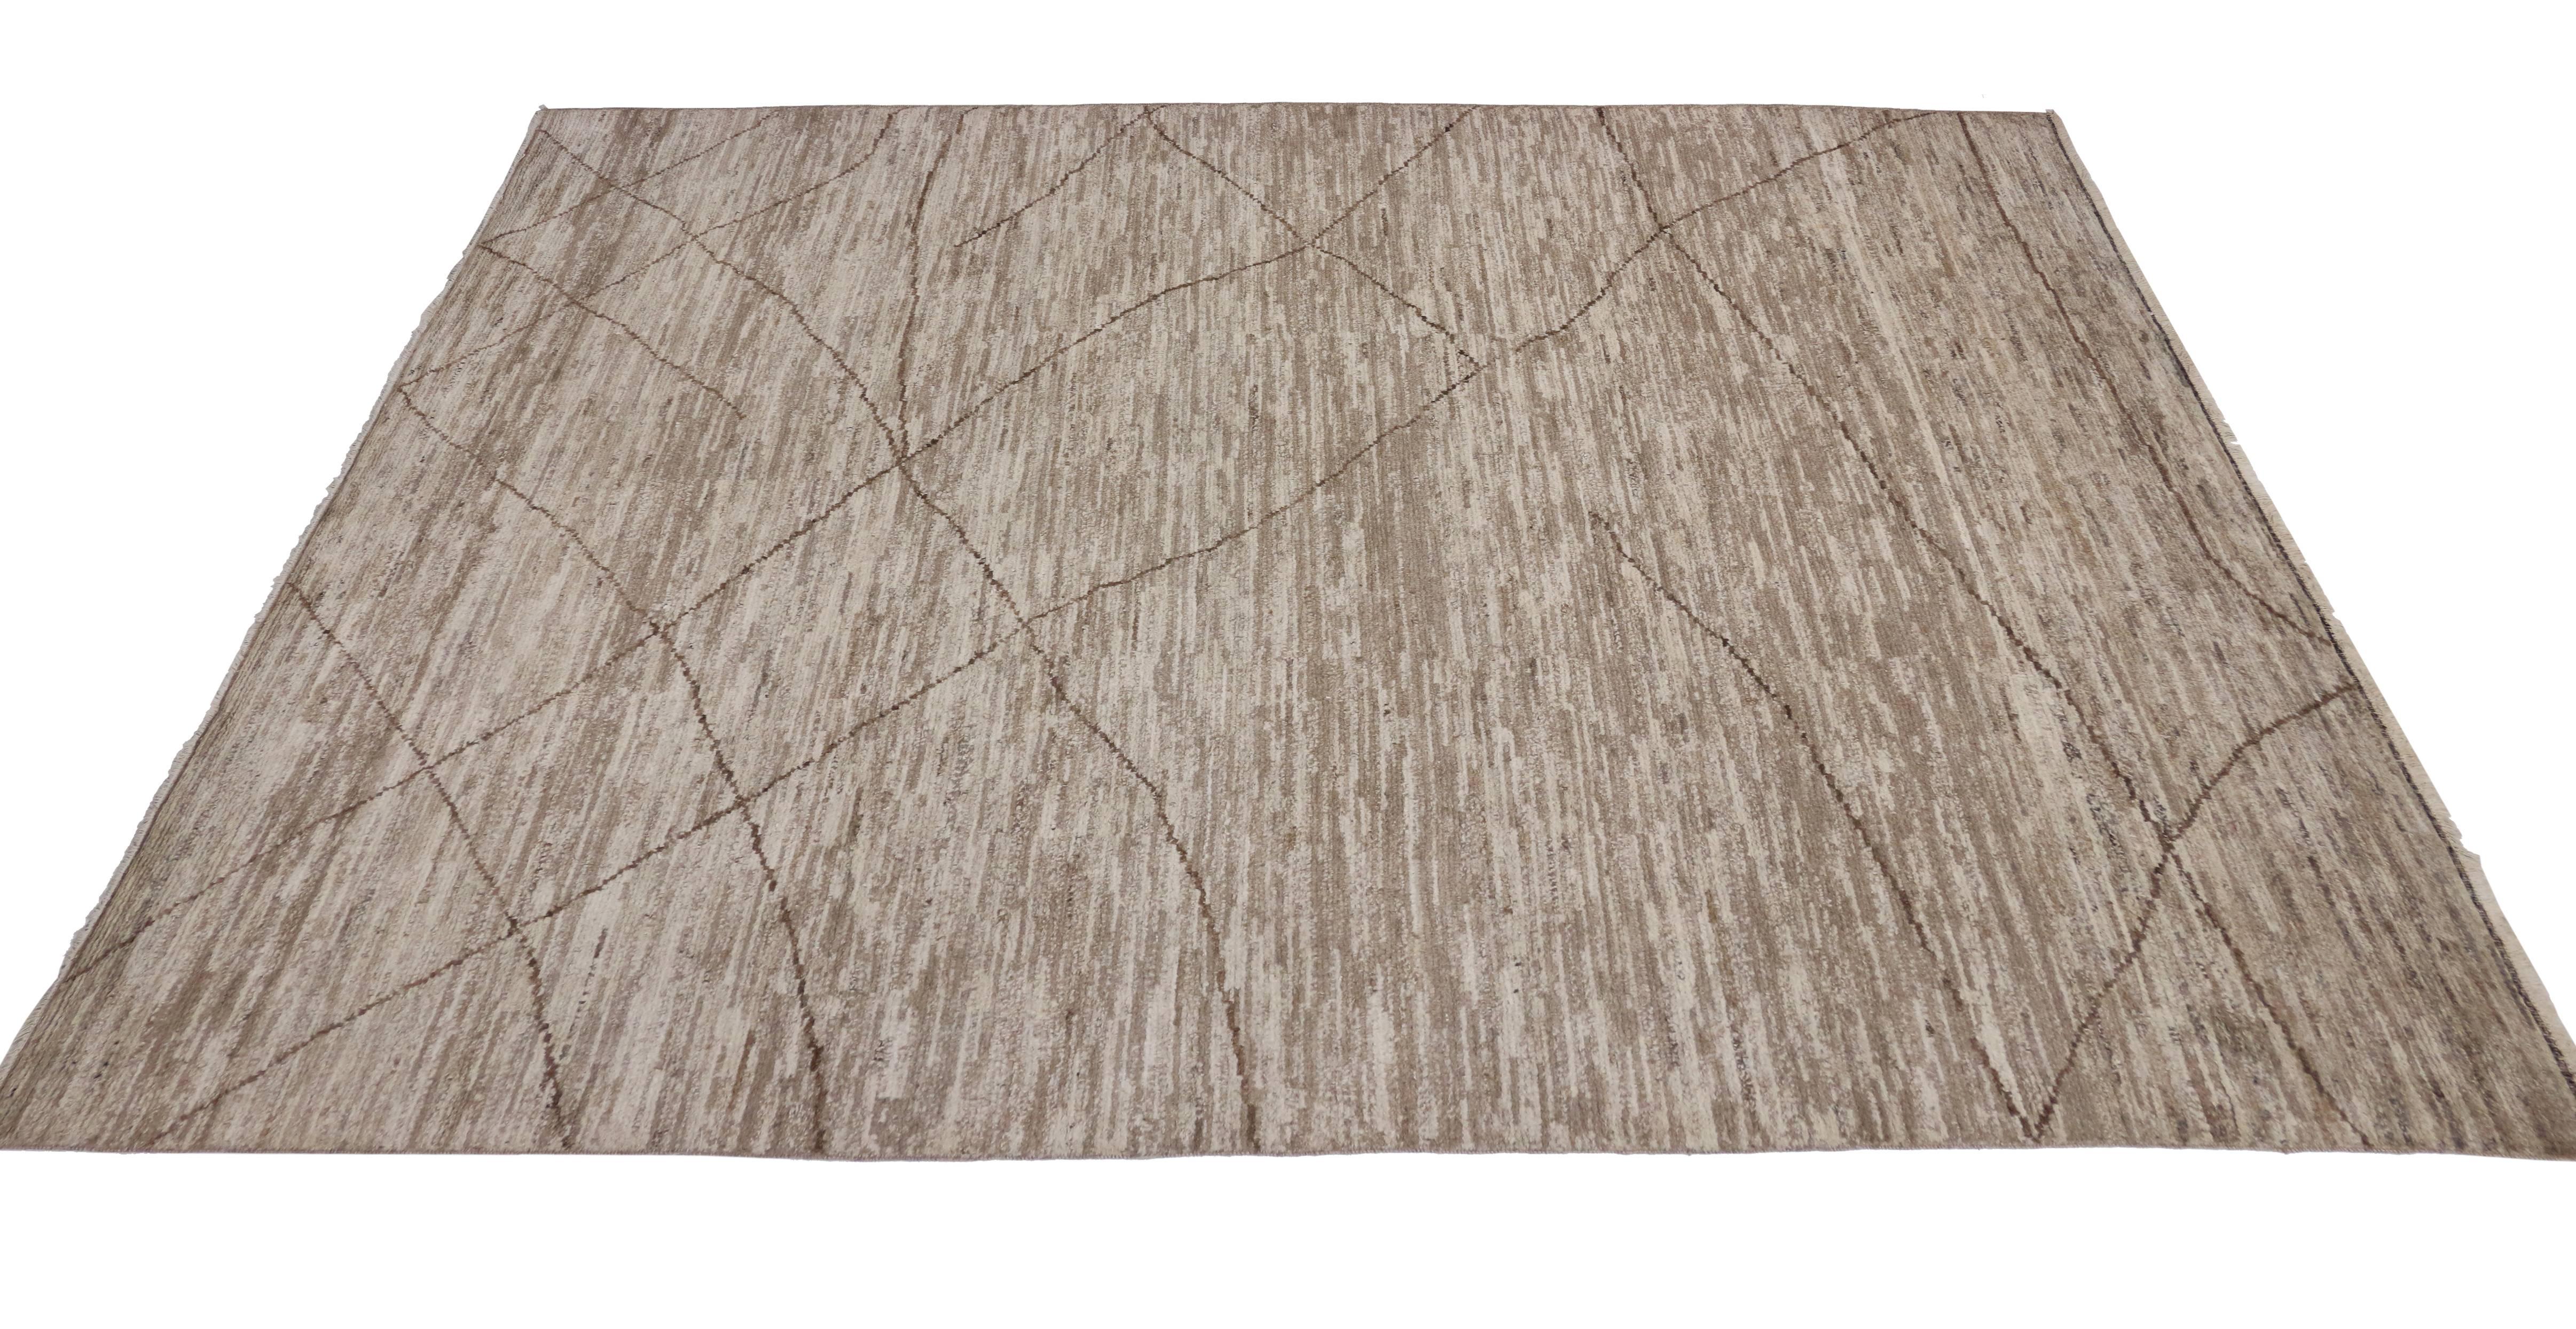 Pakistani New Contemporary Moroccan Area Rug with Modern Design, Warm Neutral Earth Tones